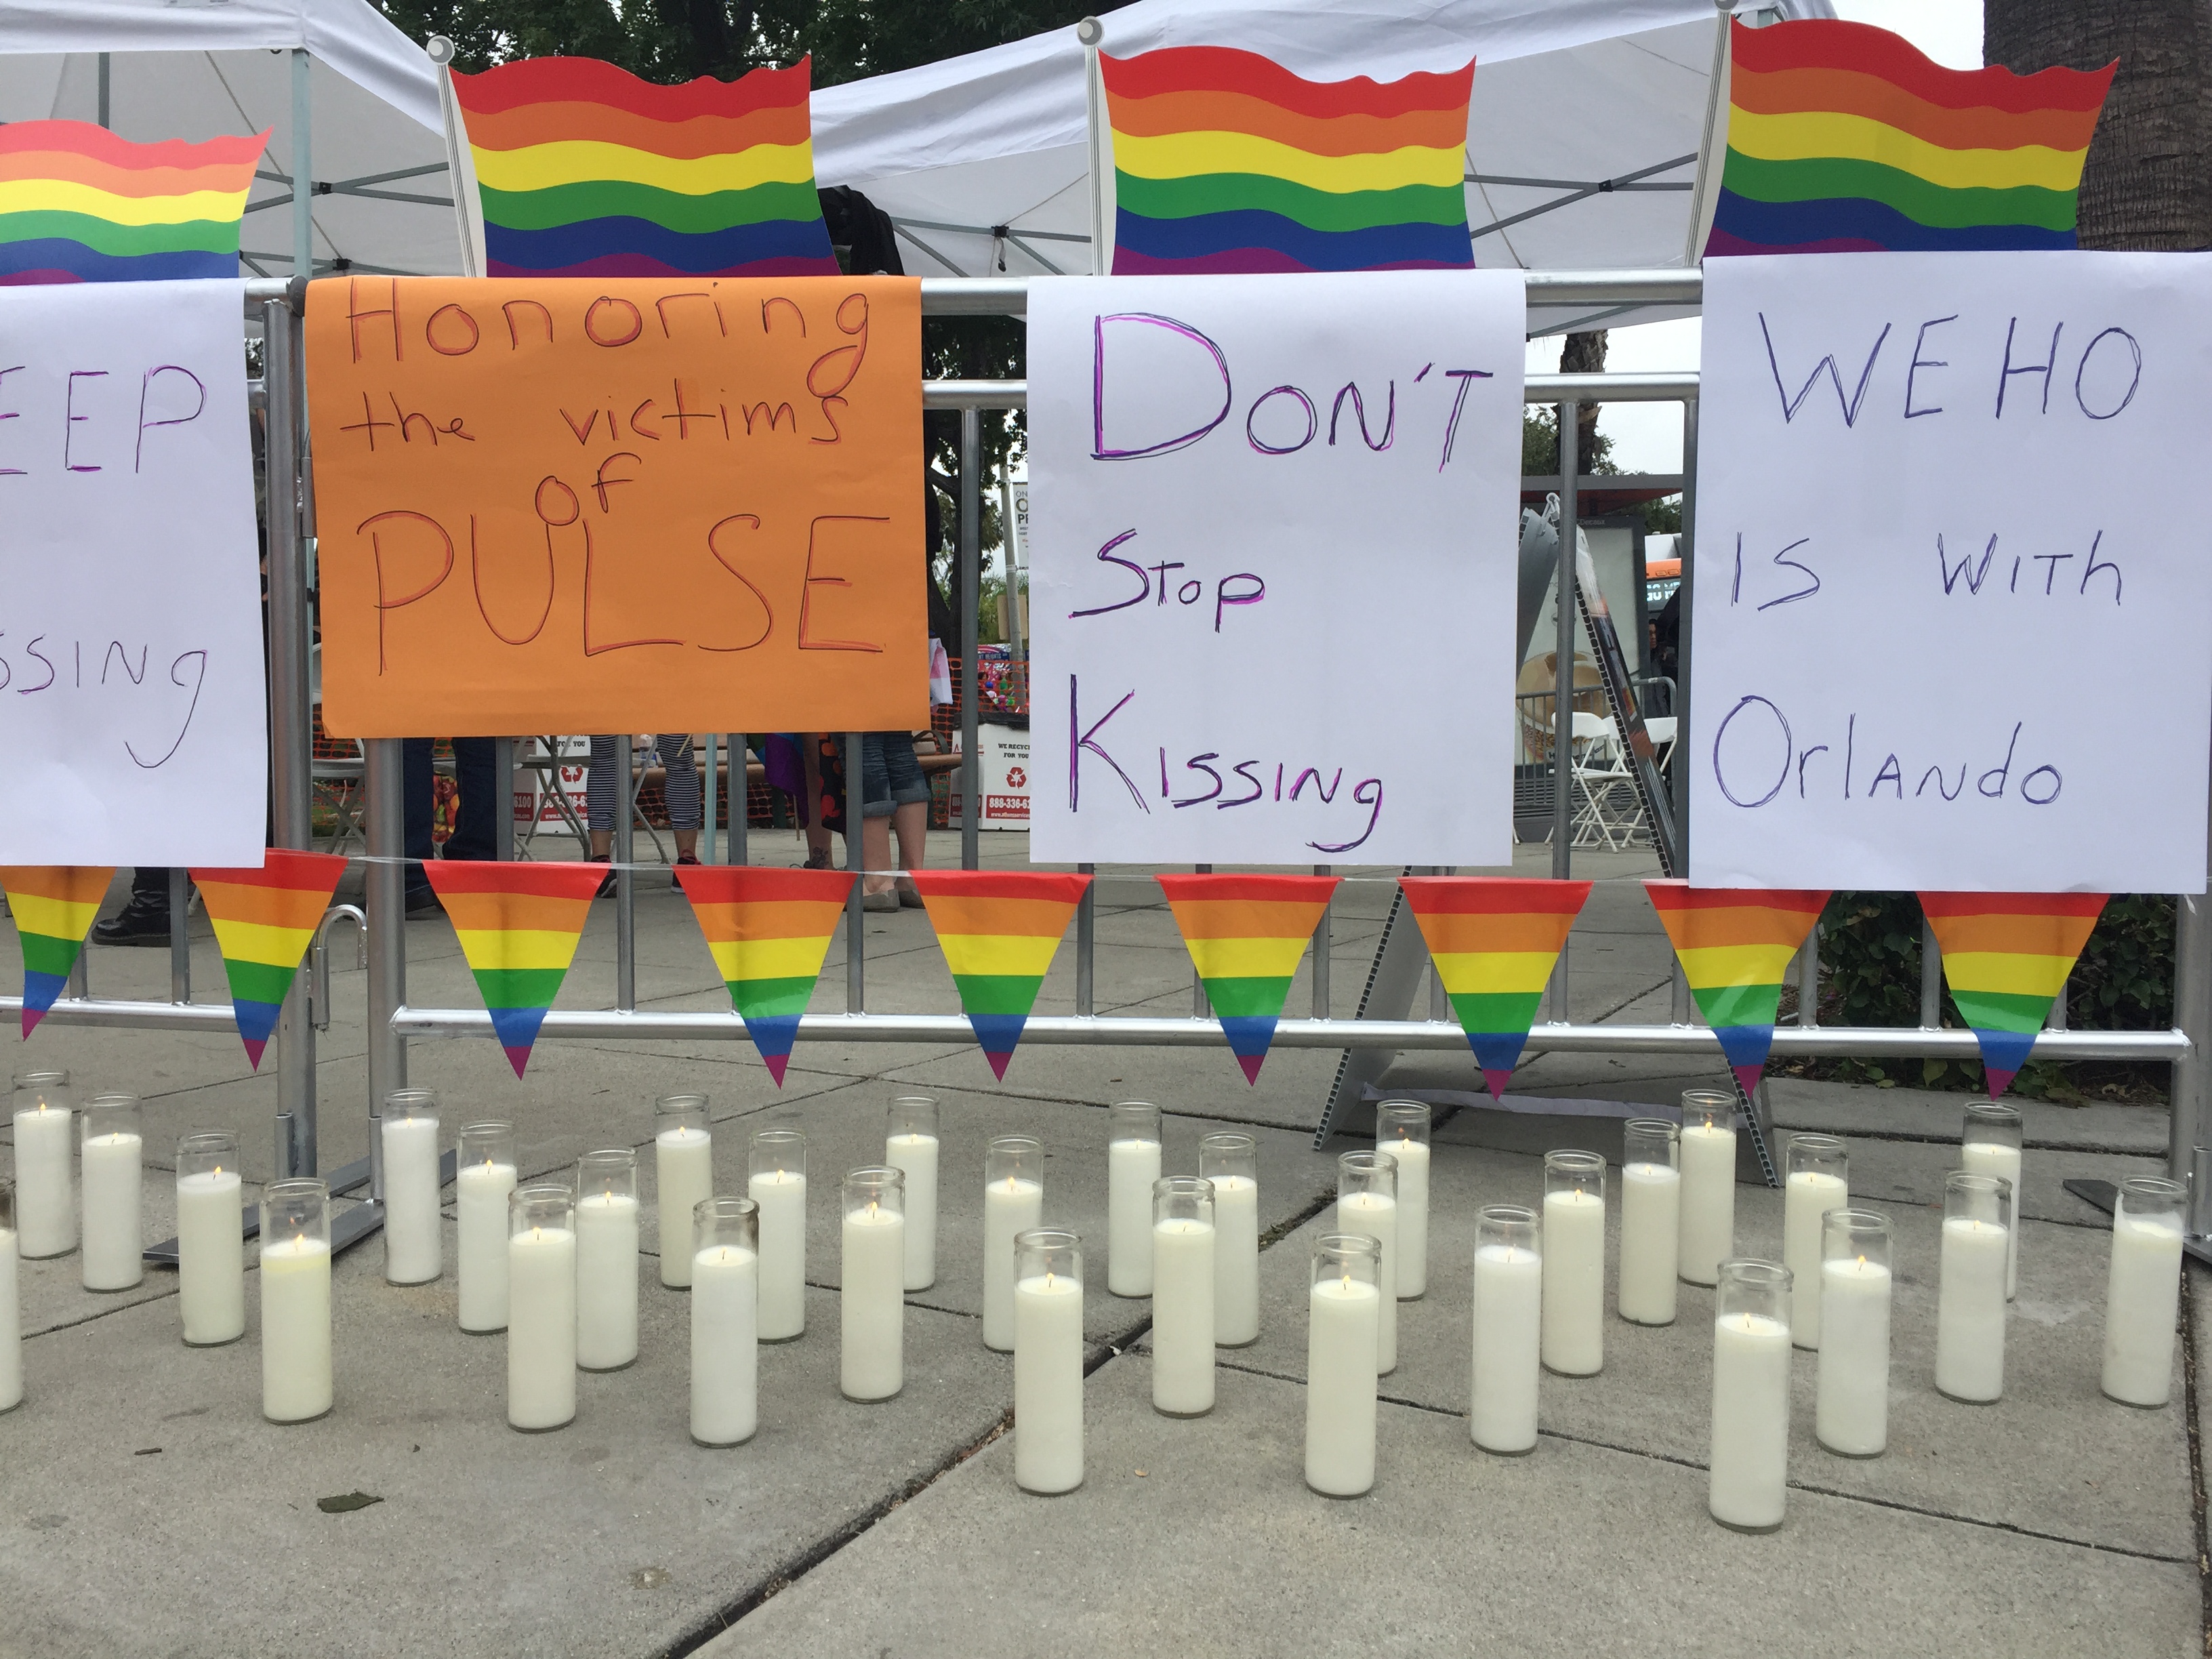 At memorial to the victims of the shooting at Pulse nightclub in Orlando created by Steven Reigns and Jackie Steele at Crescent Heights and Santa Monica Boulevard.